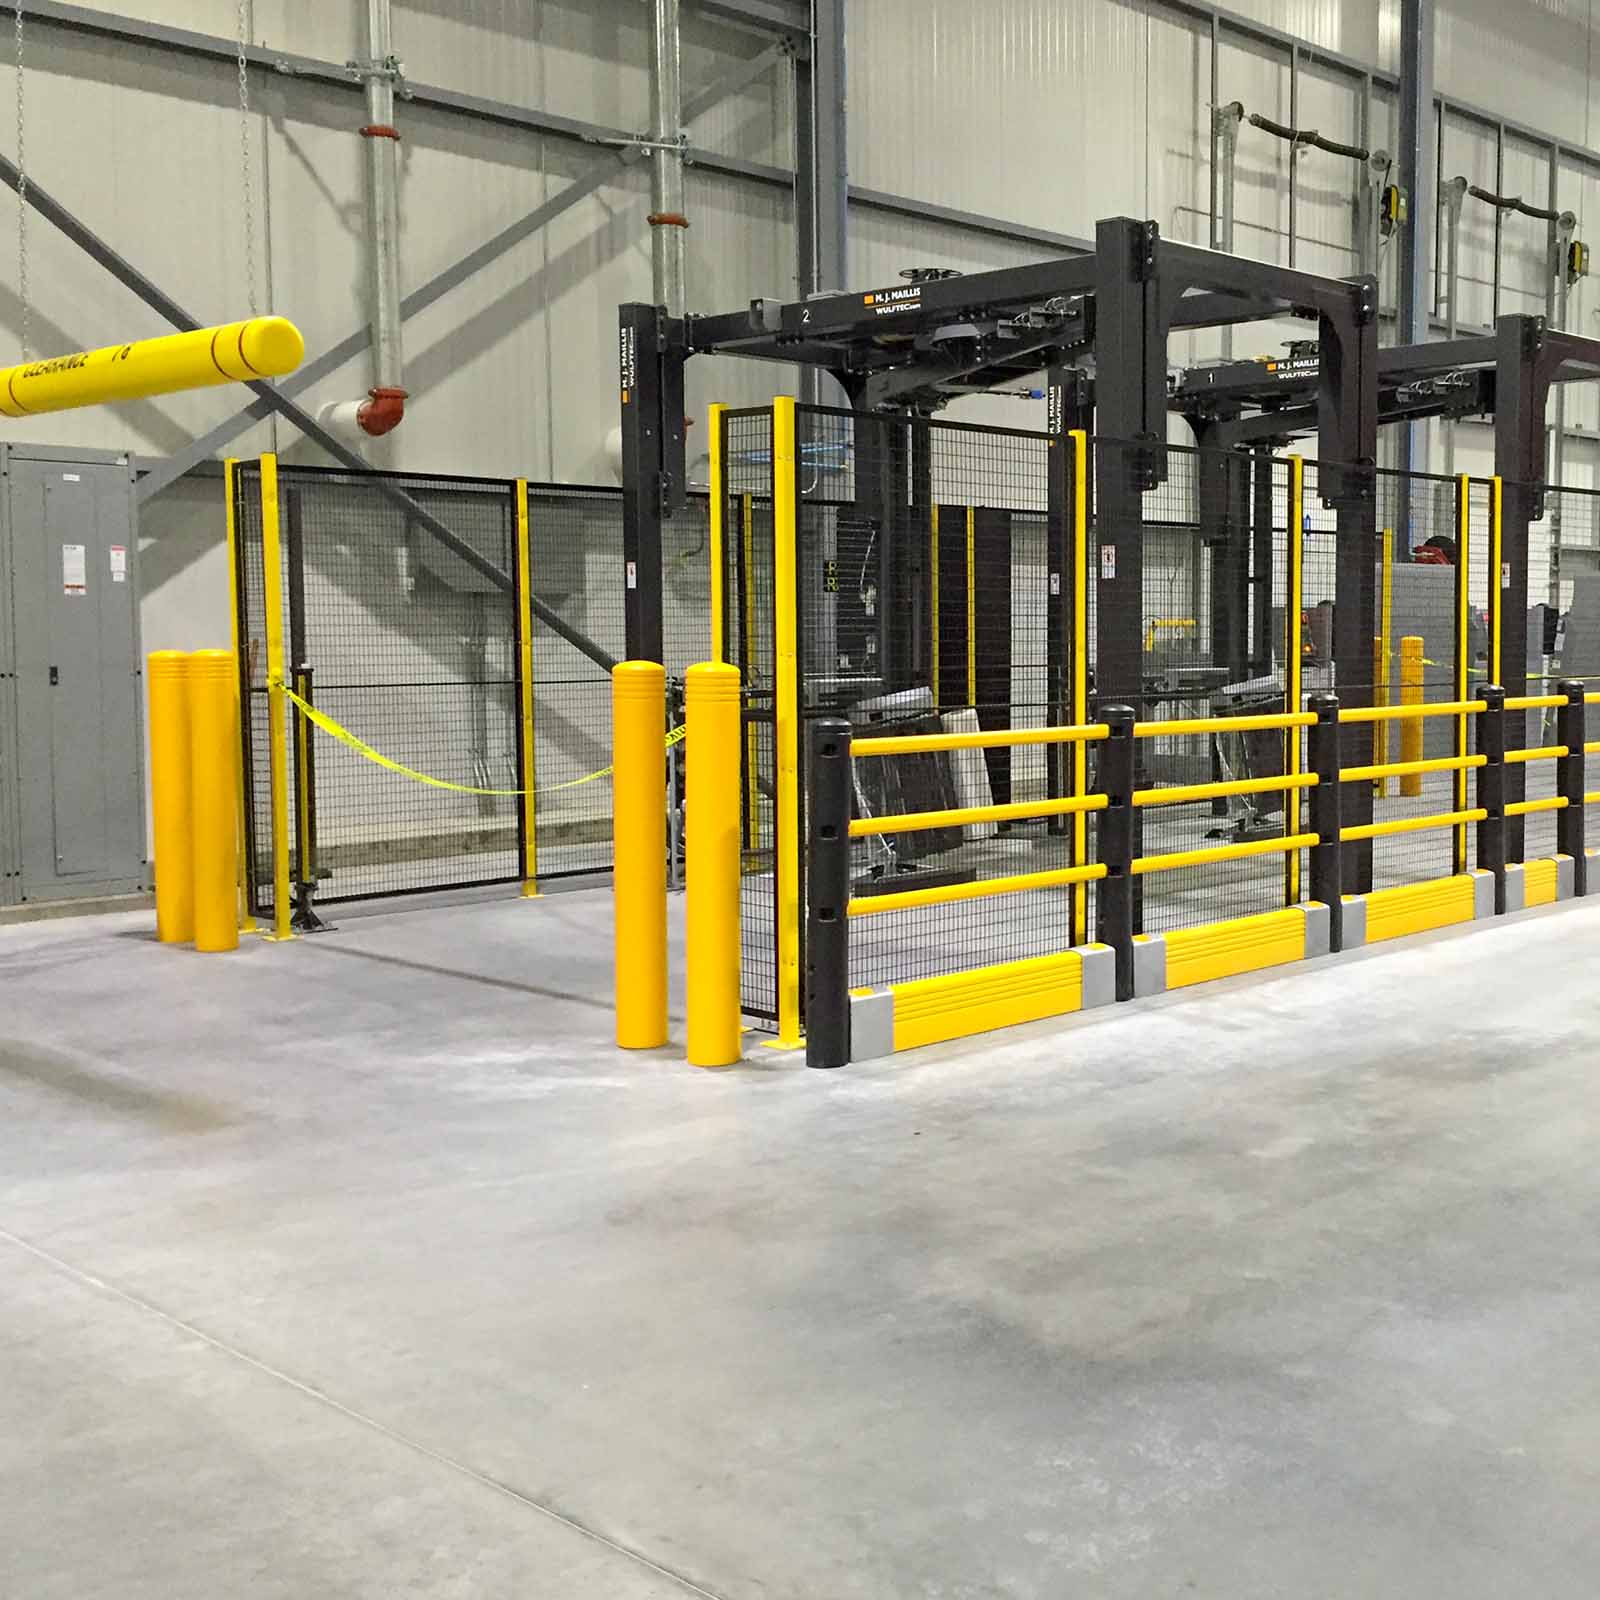 McCue Pedestrian Barrier Safety Protection with Floor Mounted Crash Barrier PLUS in Warehouse